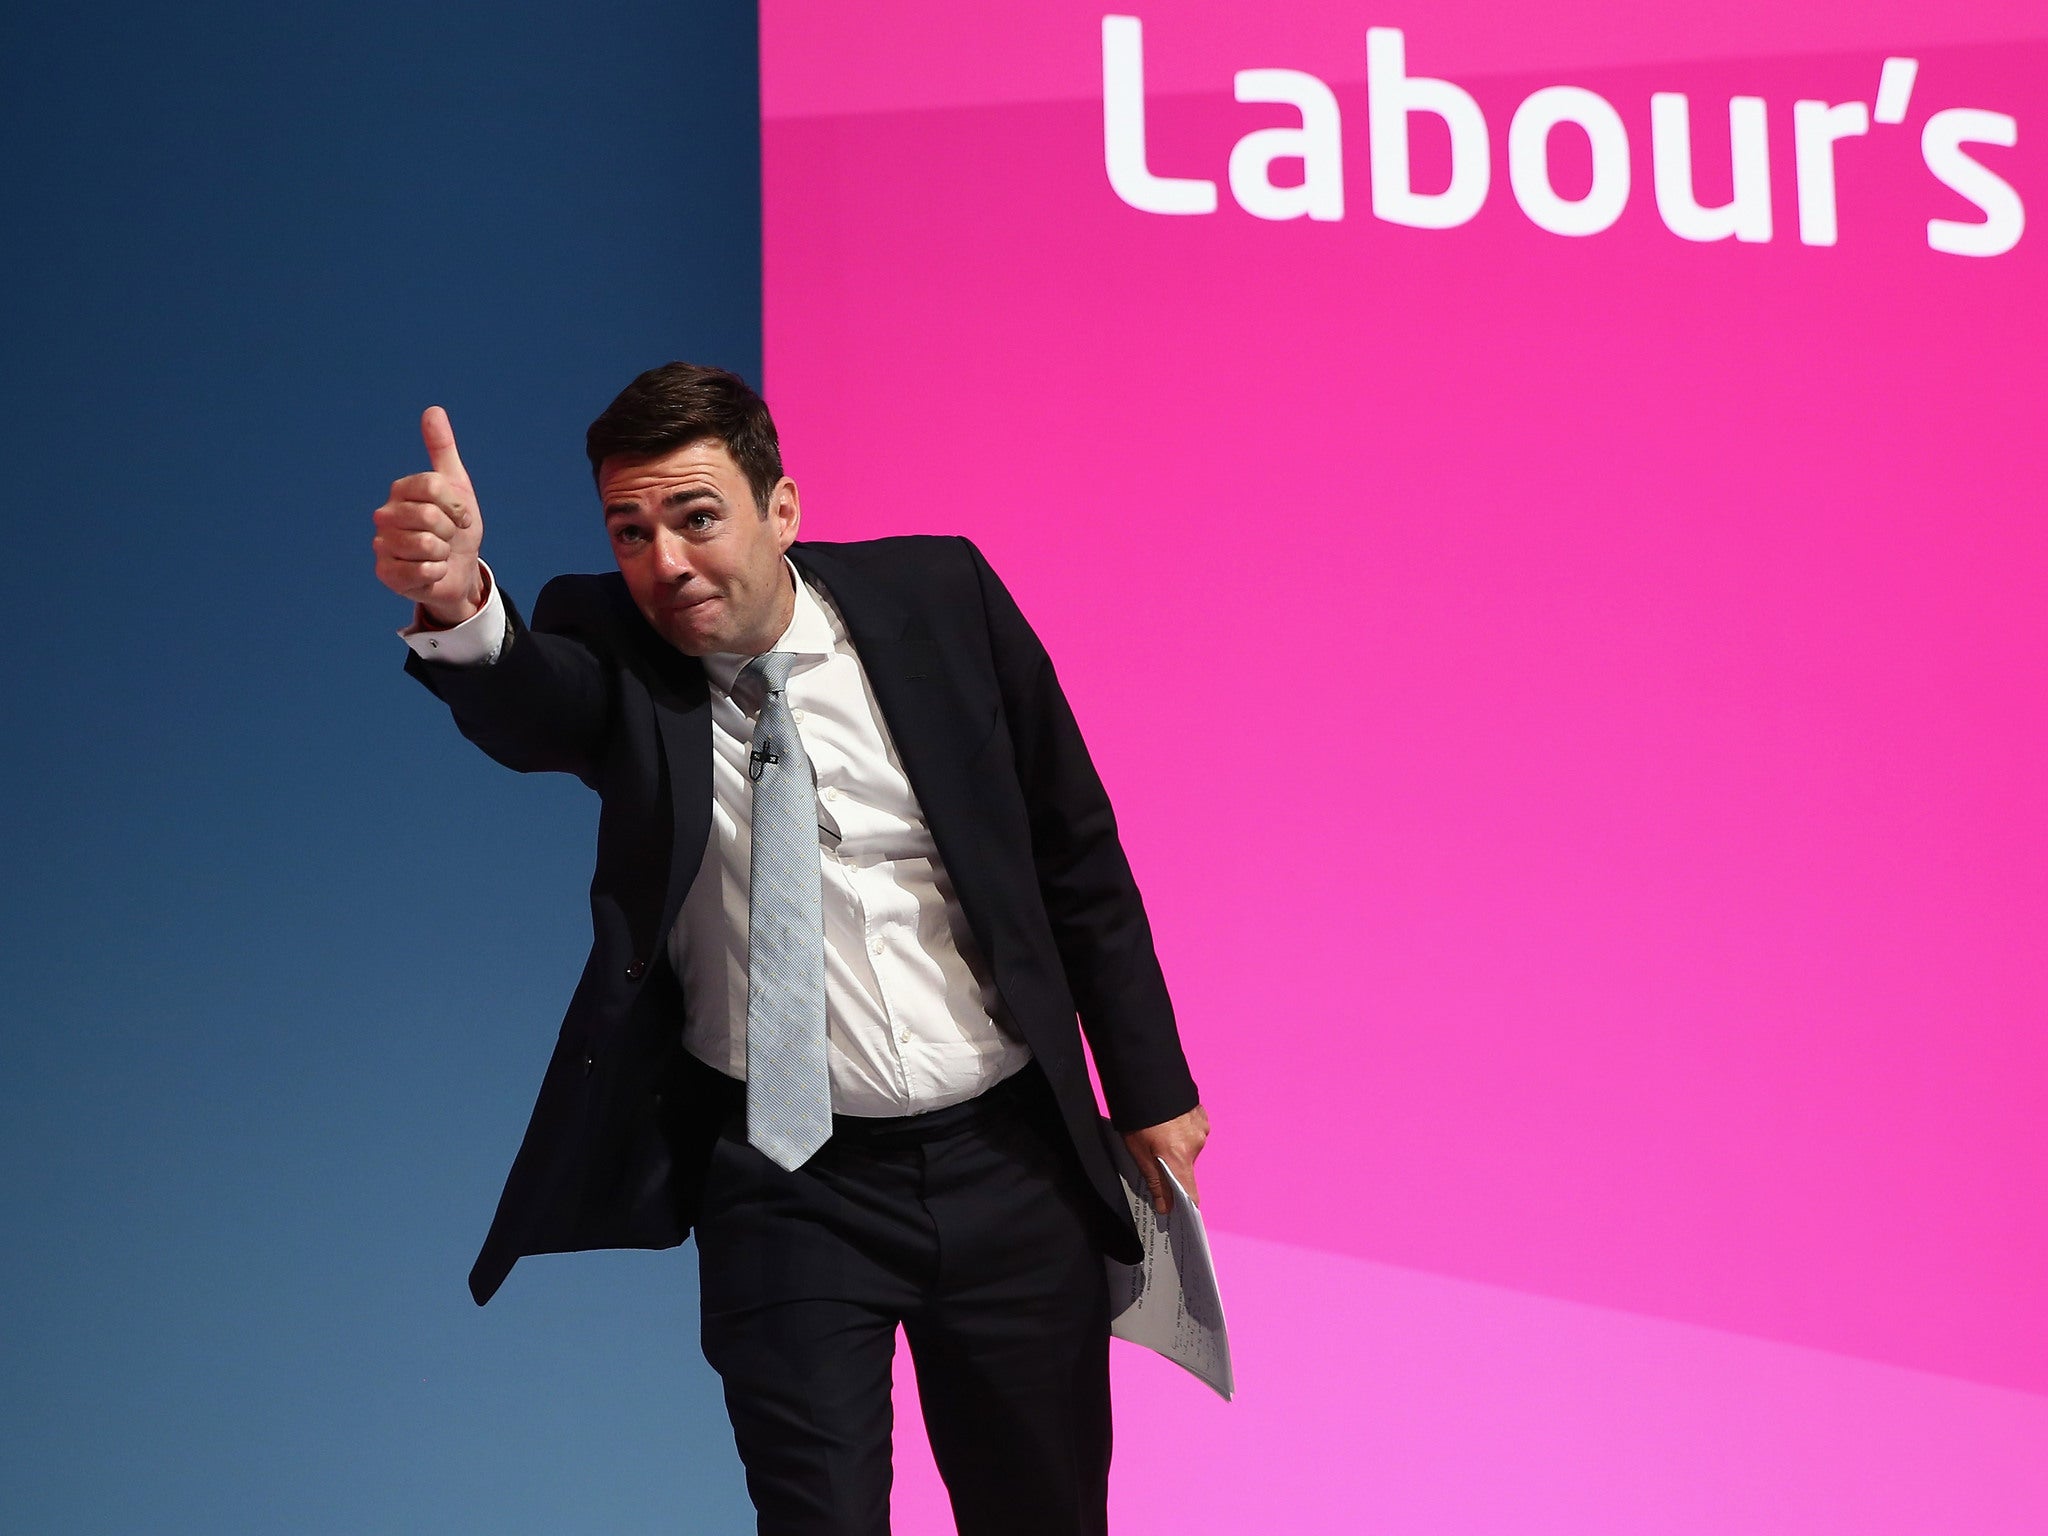 Andy Burnham abstained on the welfare reforms vote